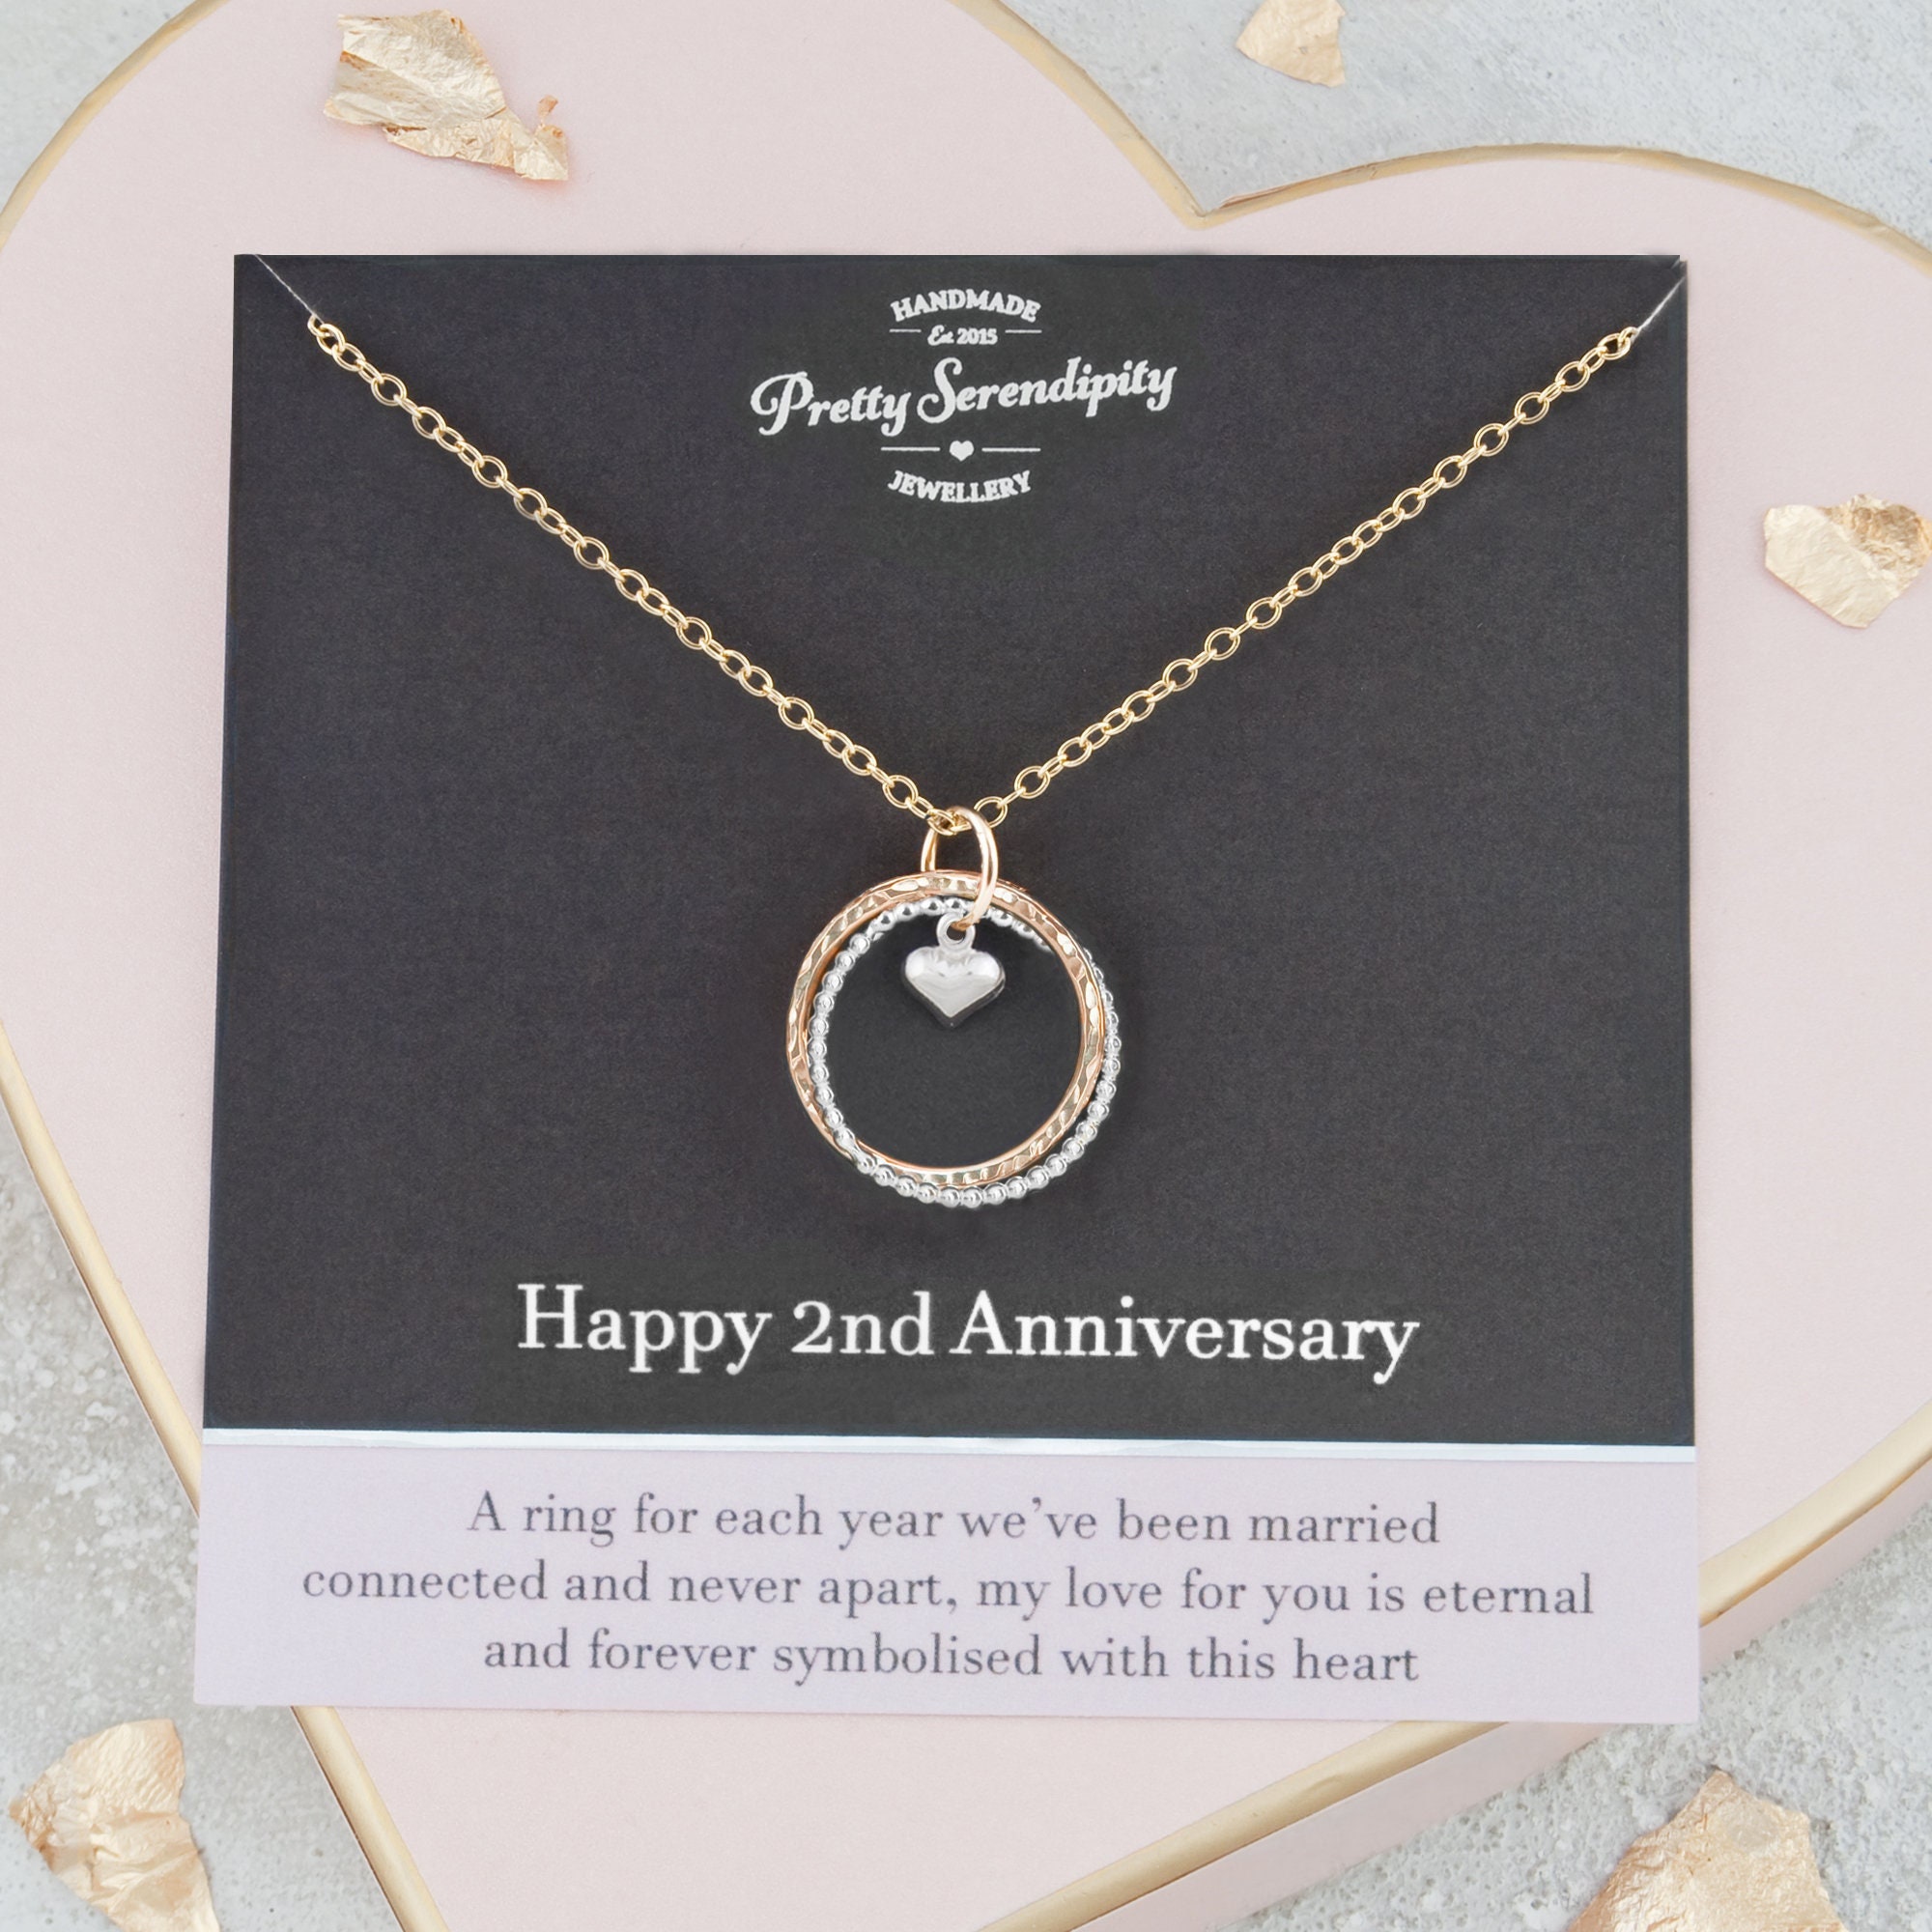 6 Month Anniversary Gift for Boyfriend, Sentimental Gifts for Boyfriend, One Year Dating Gift, 2nd Anniversary Gift, Pinky Promise Necklace